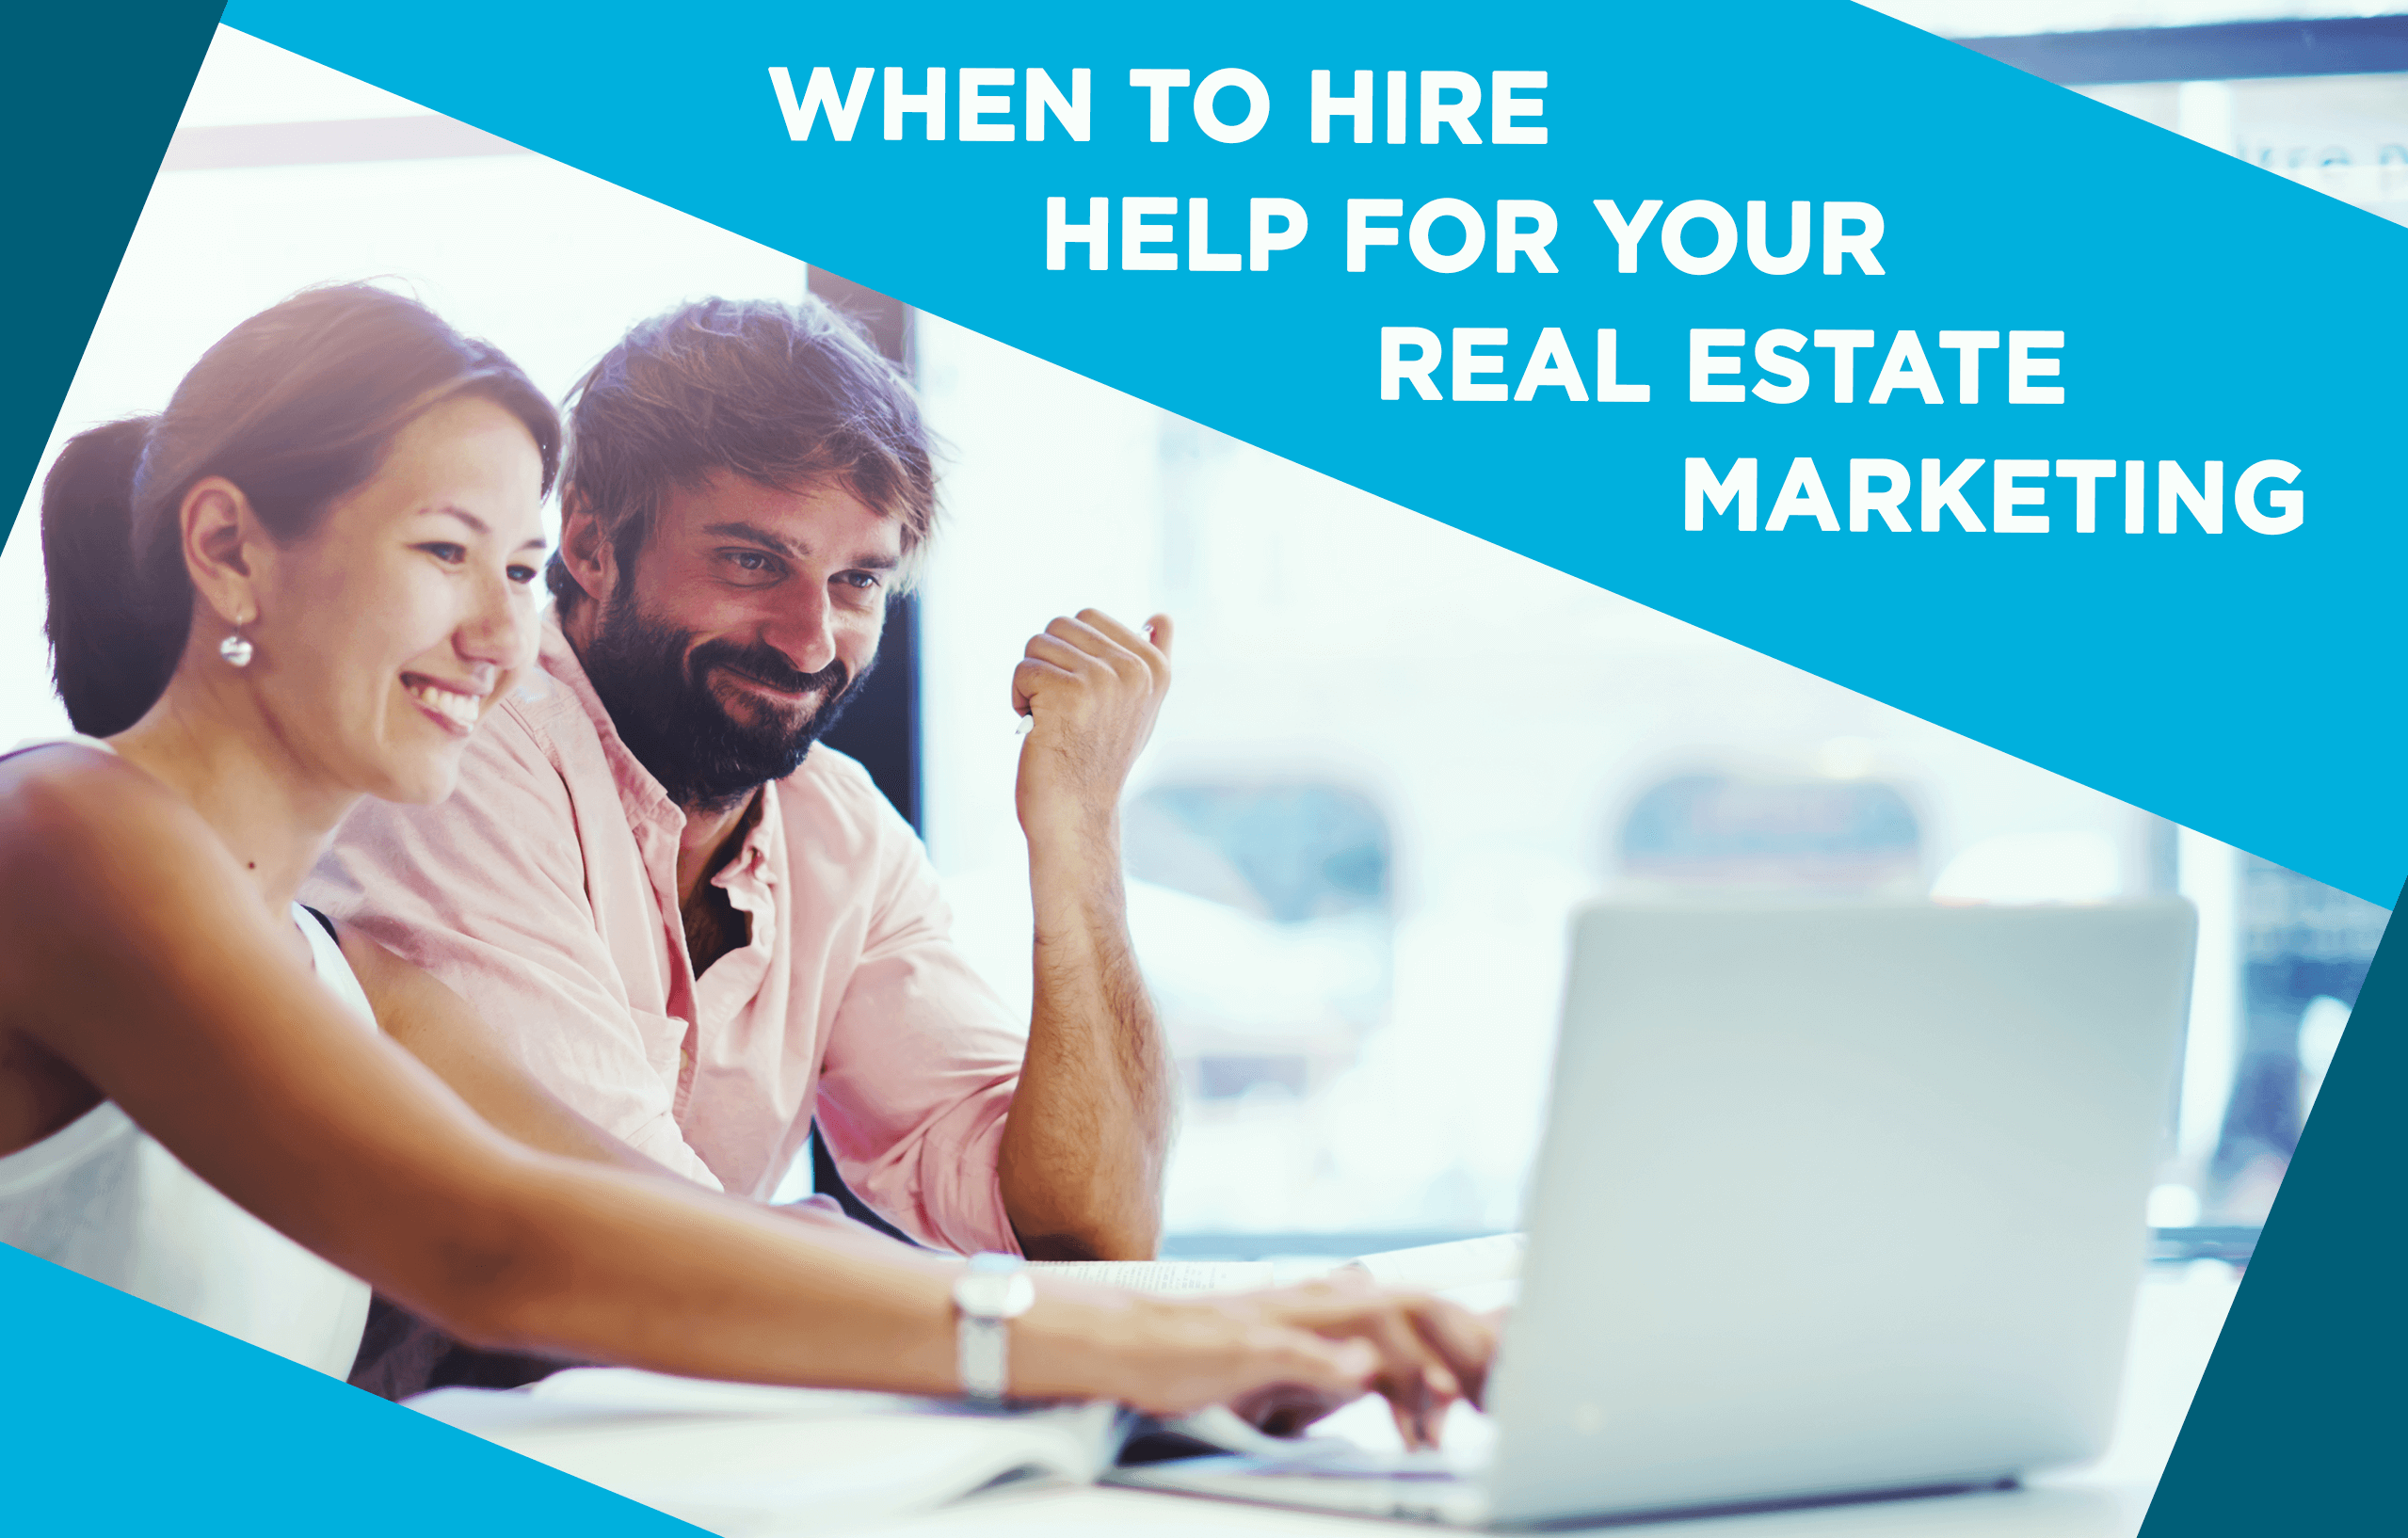 When to Hire Help for Your Real Estate Marketing